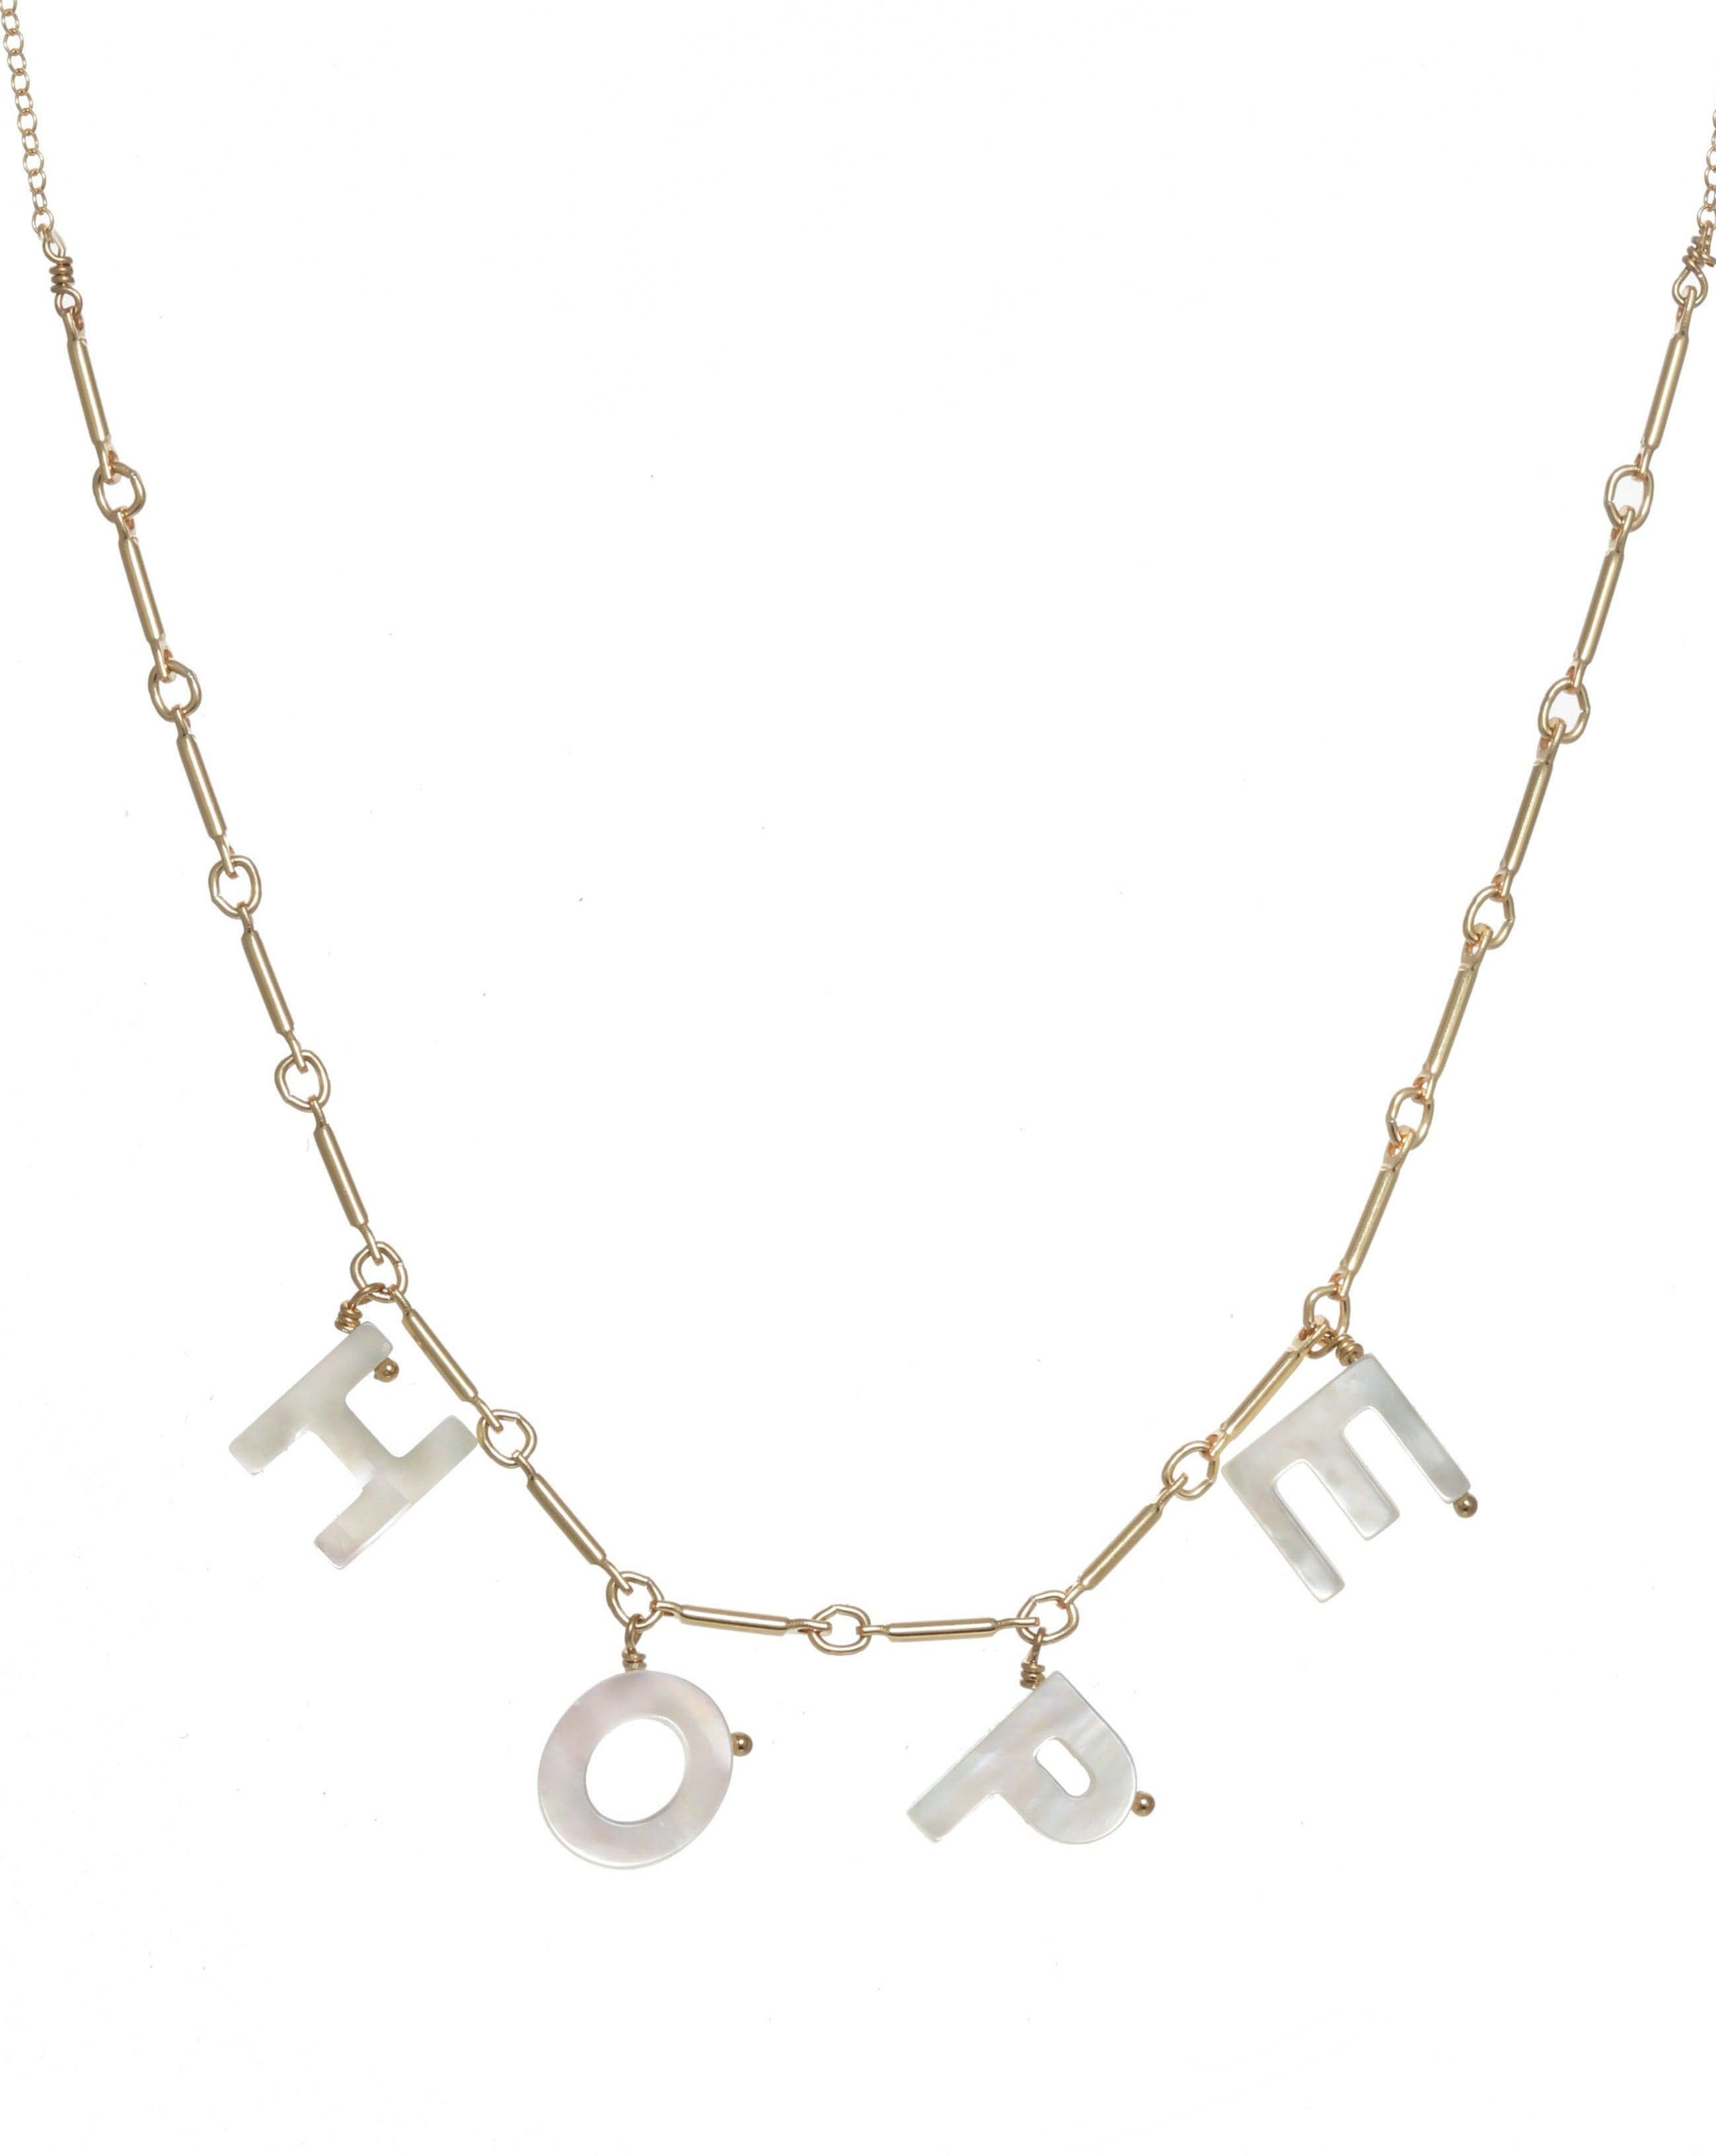 Love Necklace by KOZAKH. A 16 to 18 inch adjustable length necklace with linked bar chain on bottom half and flat link chain on top half, crafted in 14K Gold Filled, featuring a customizable word made from hand carved Mother of Pearl letters.